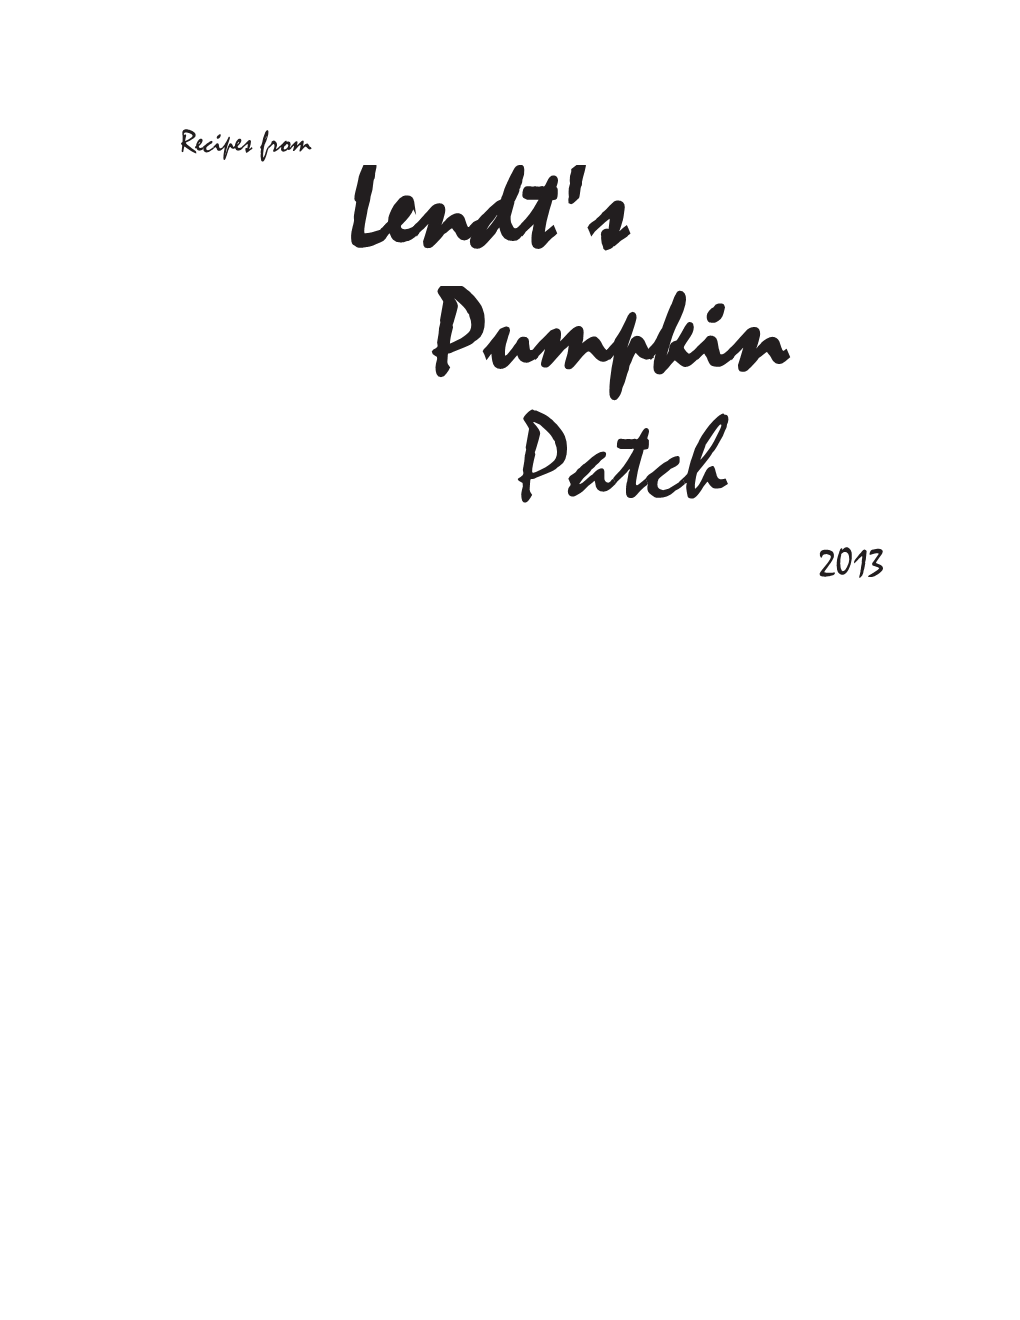 Recipes from Lendt's